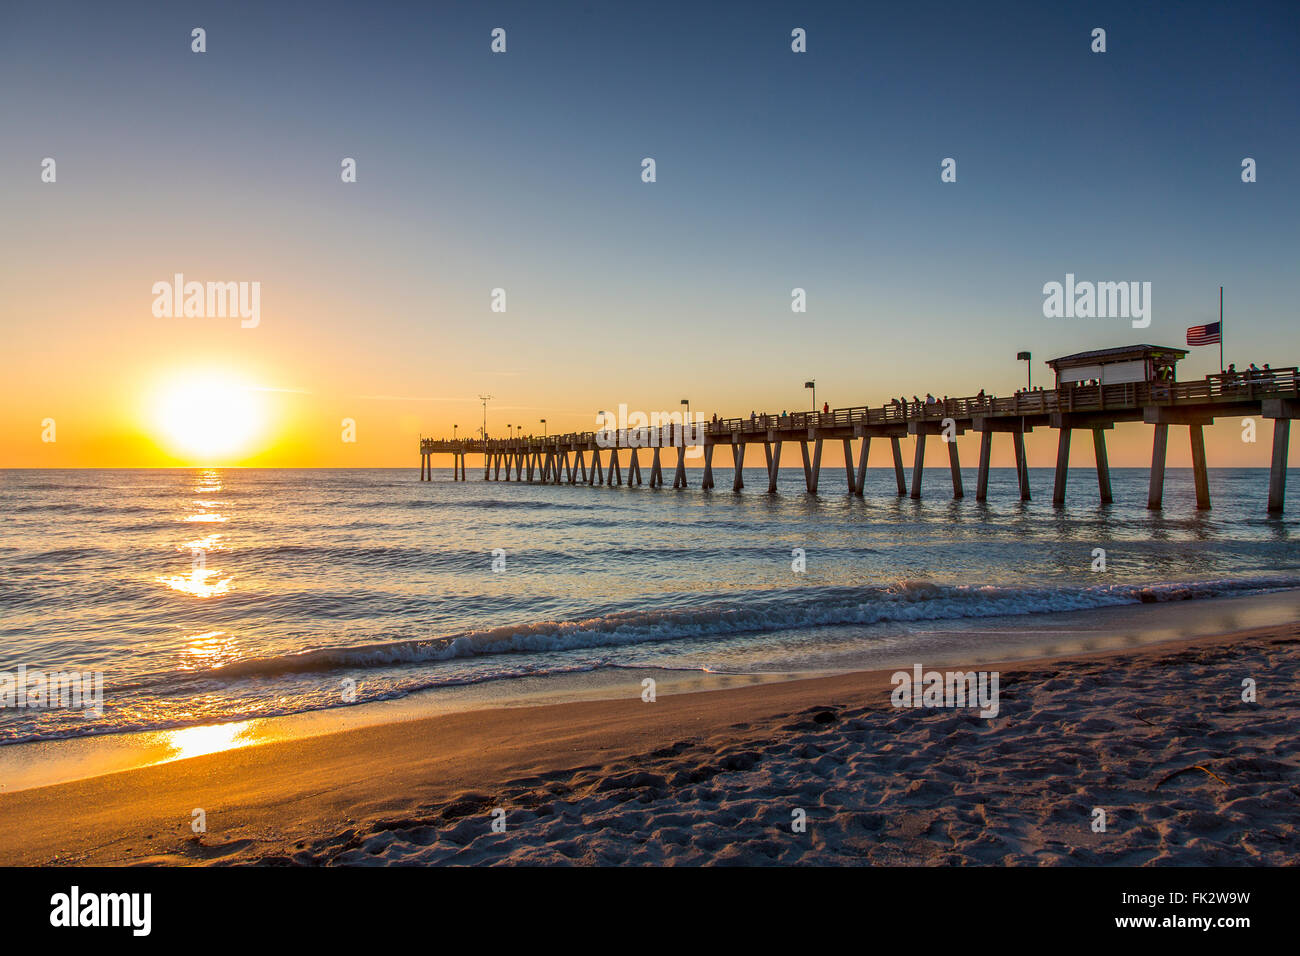 Sunset over Gulf of Mexico and Venice Pier in Venice Florida Stock Photo